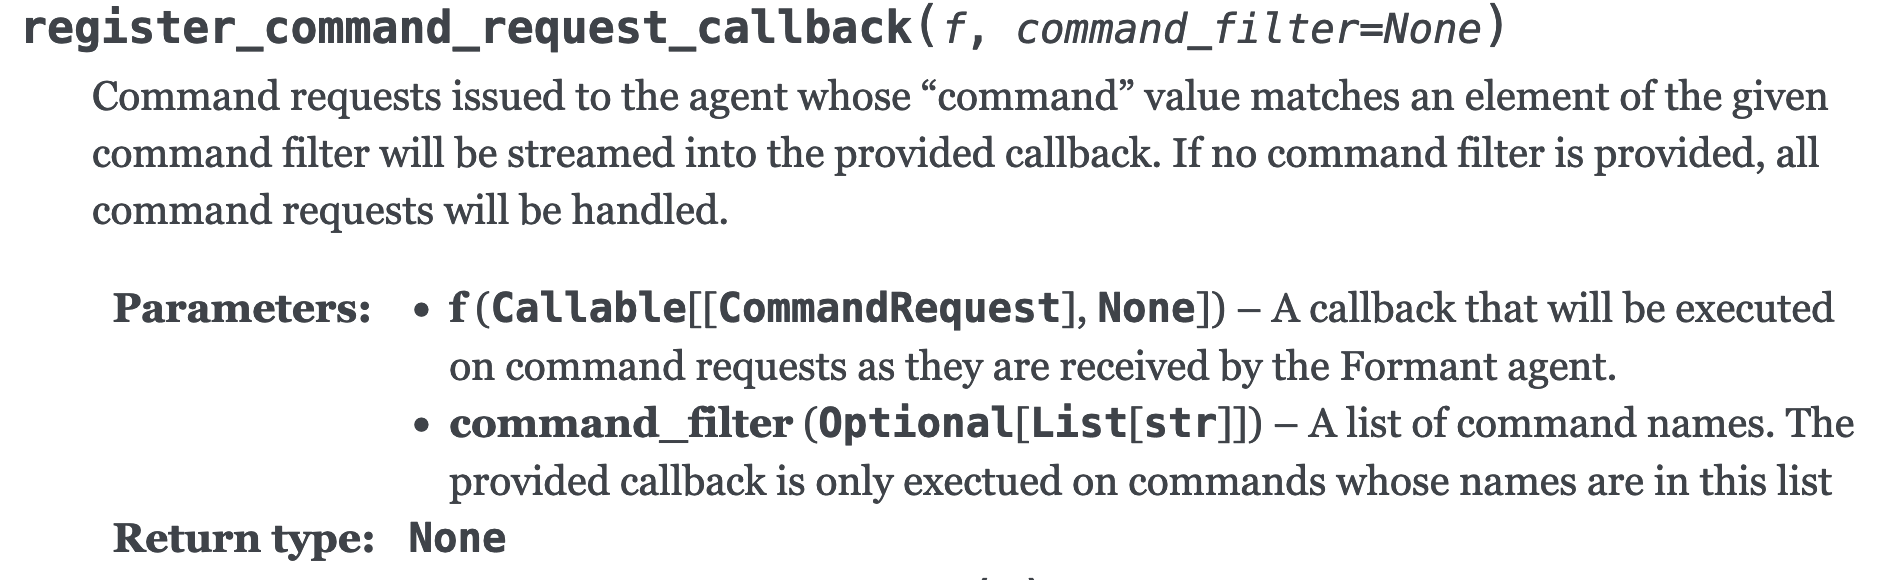 The register command request callback method in the Agent SDK reference